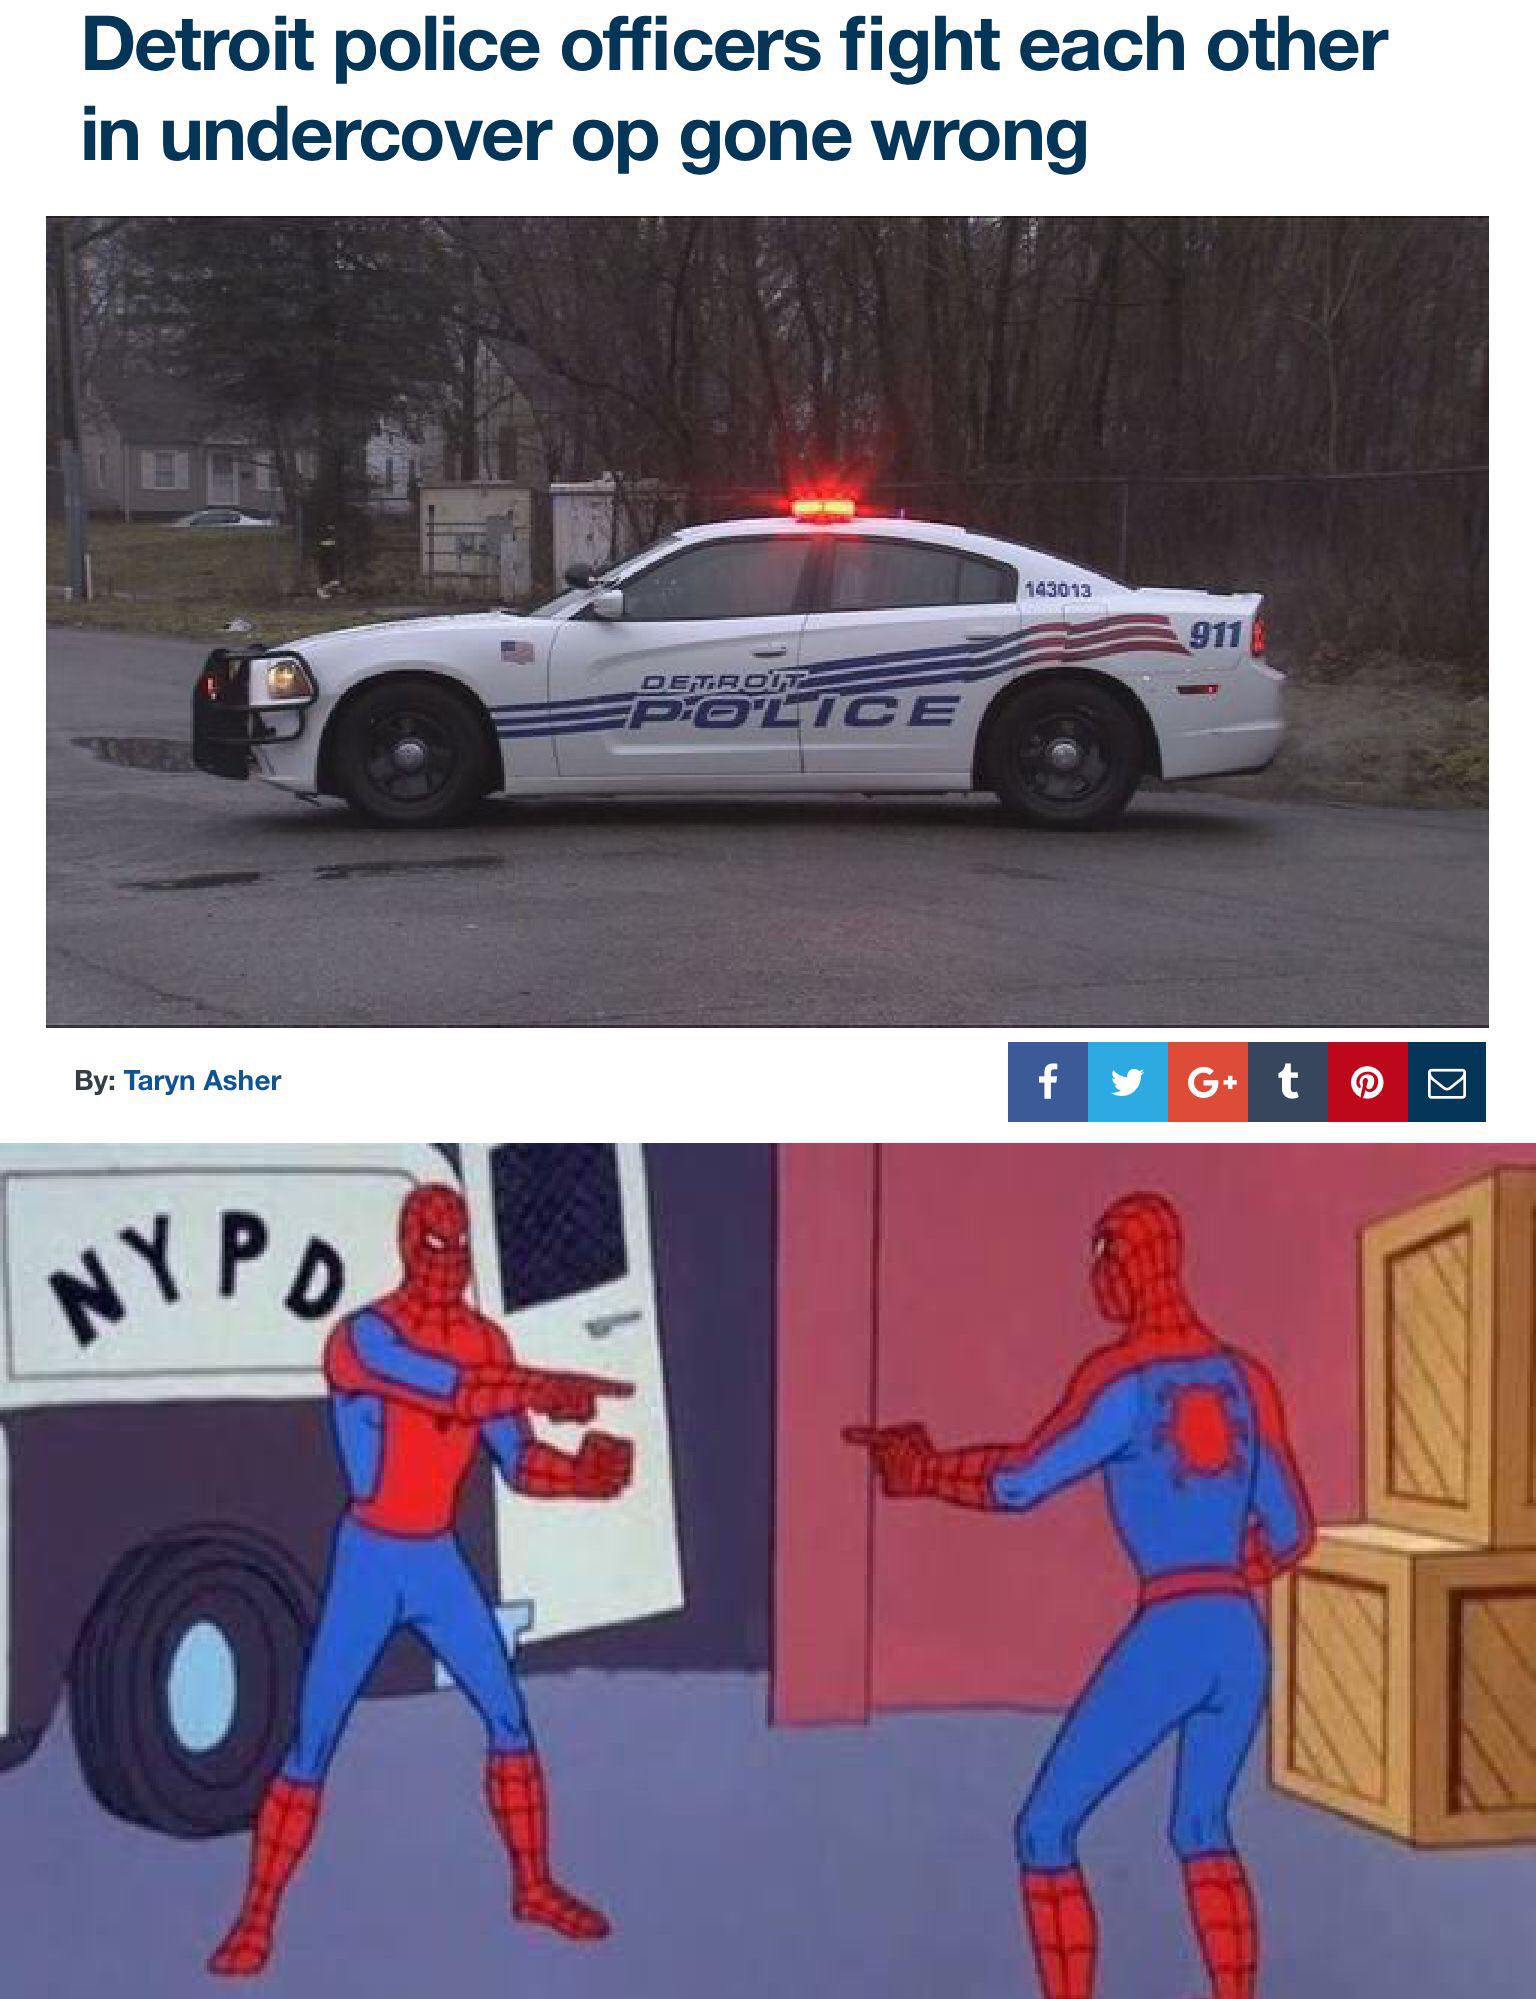 memes - spider man cop meme - Detroit police officers fight each other in undercover op gone wrong 143013 911 DETRO17 Ace By Taryn Asher Nyp